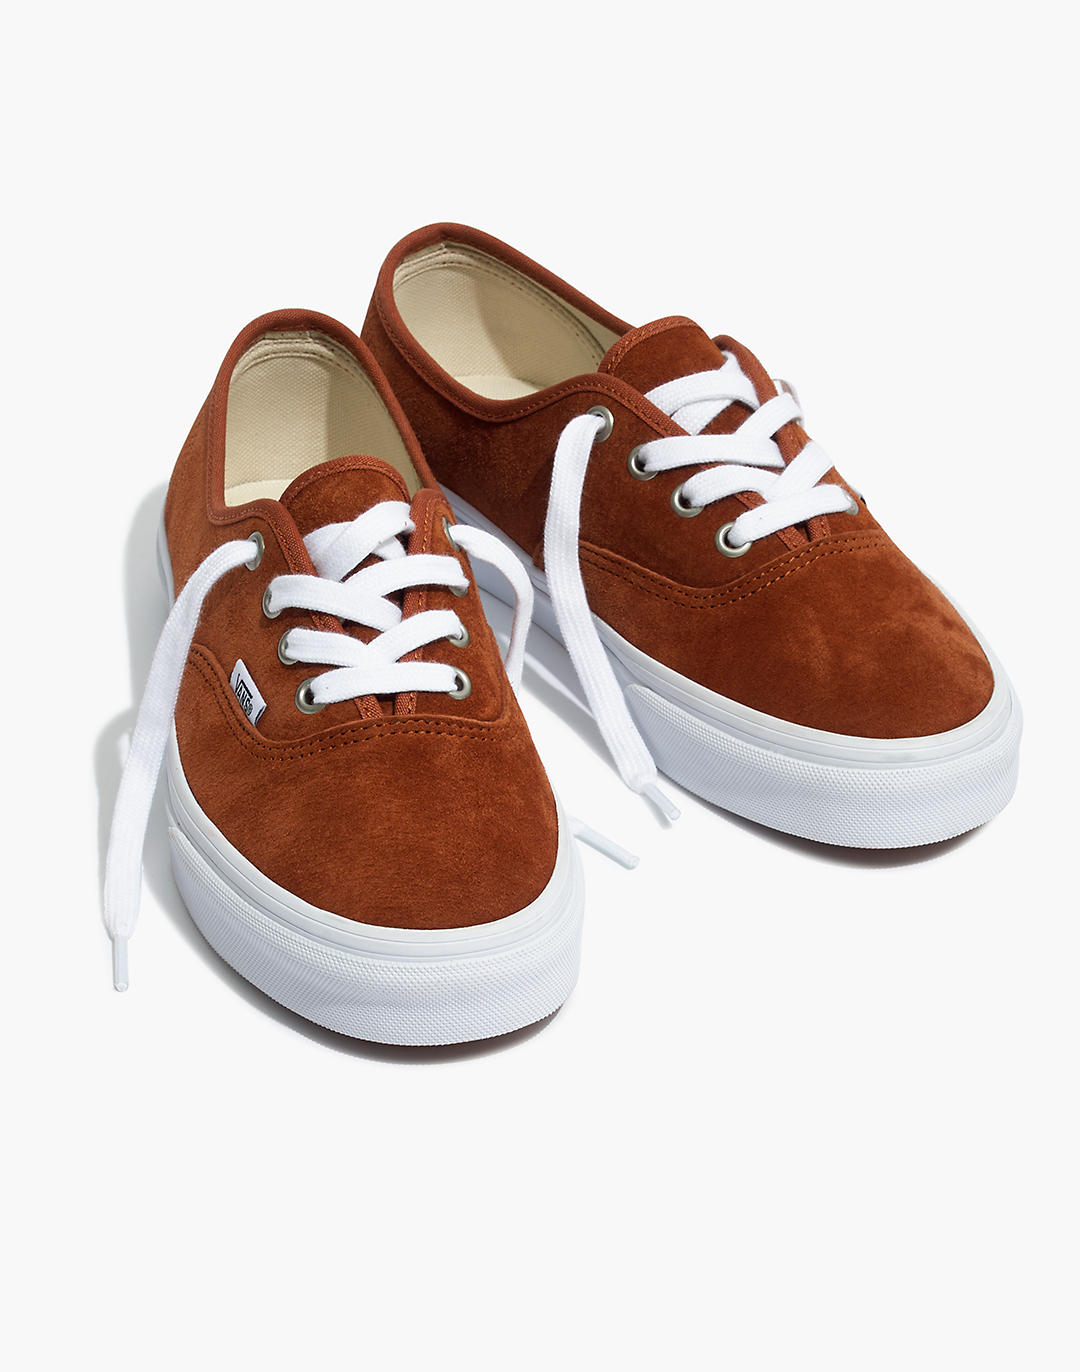 Vans® Authentic Lace-Up Sneakers Brown Suede